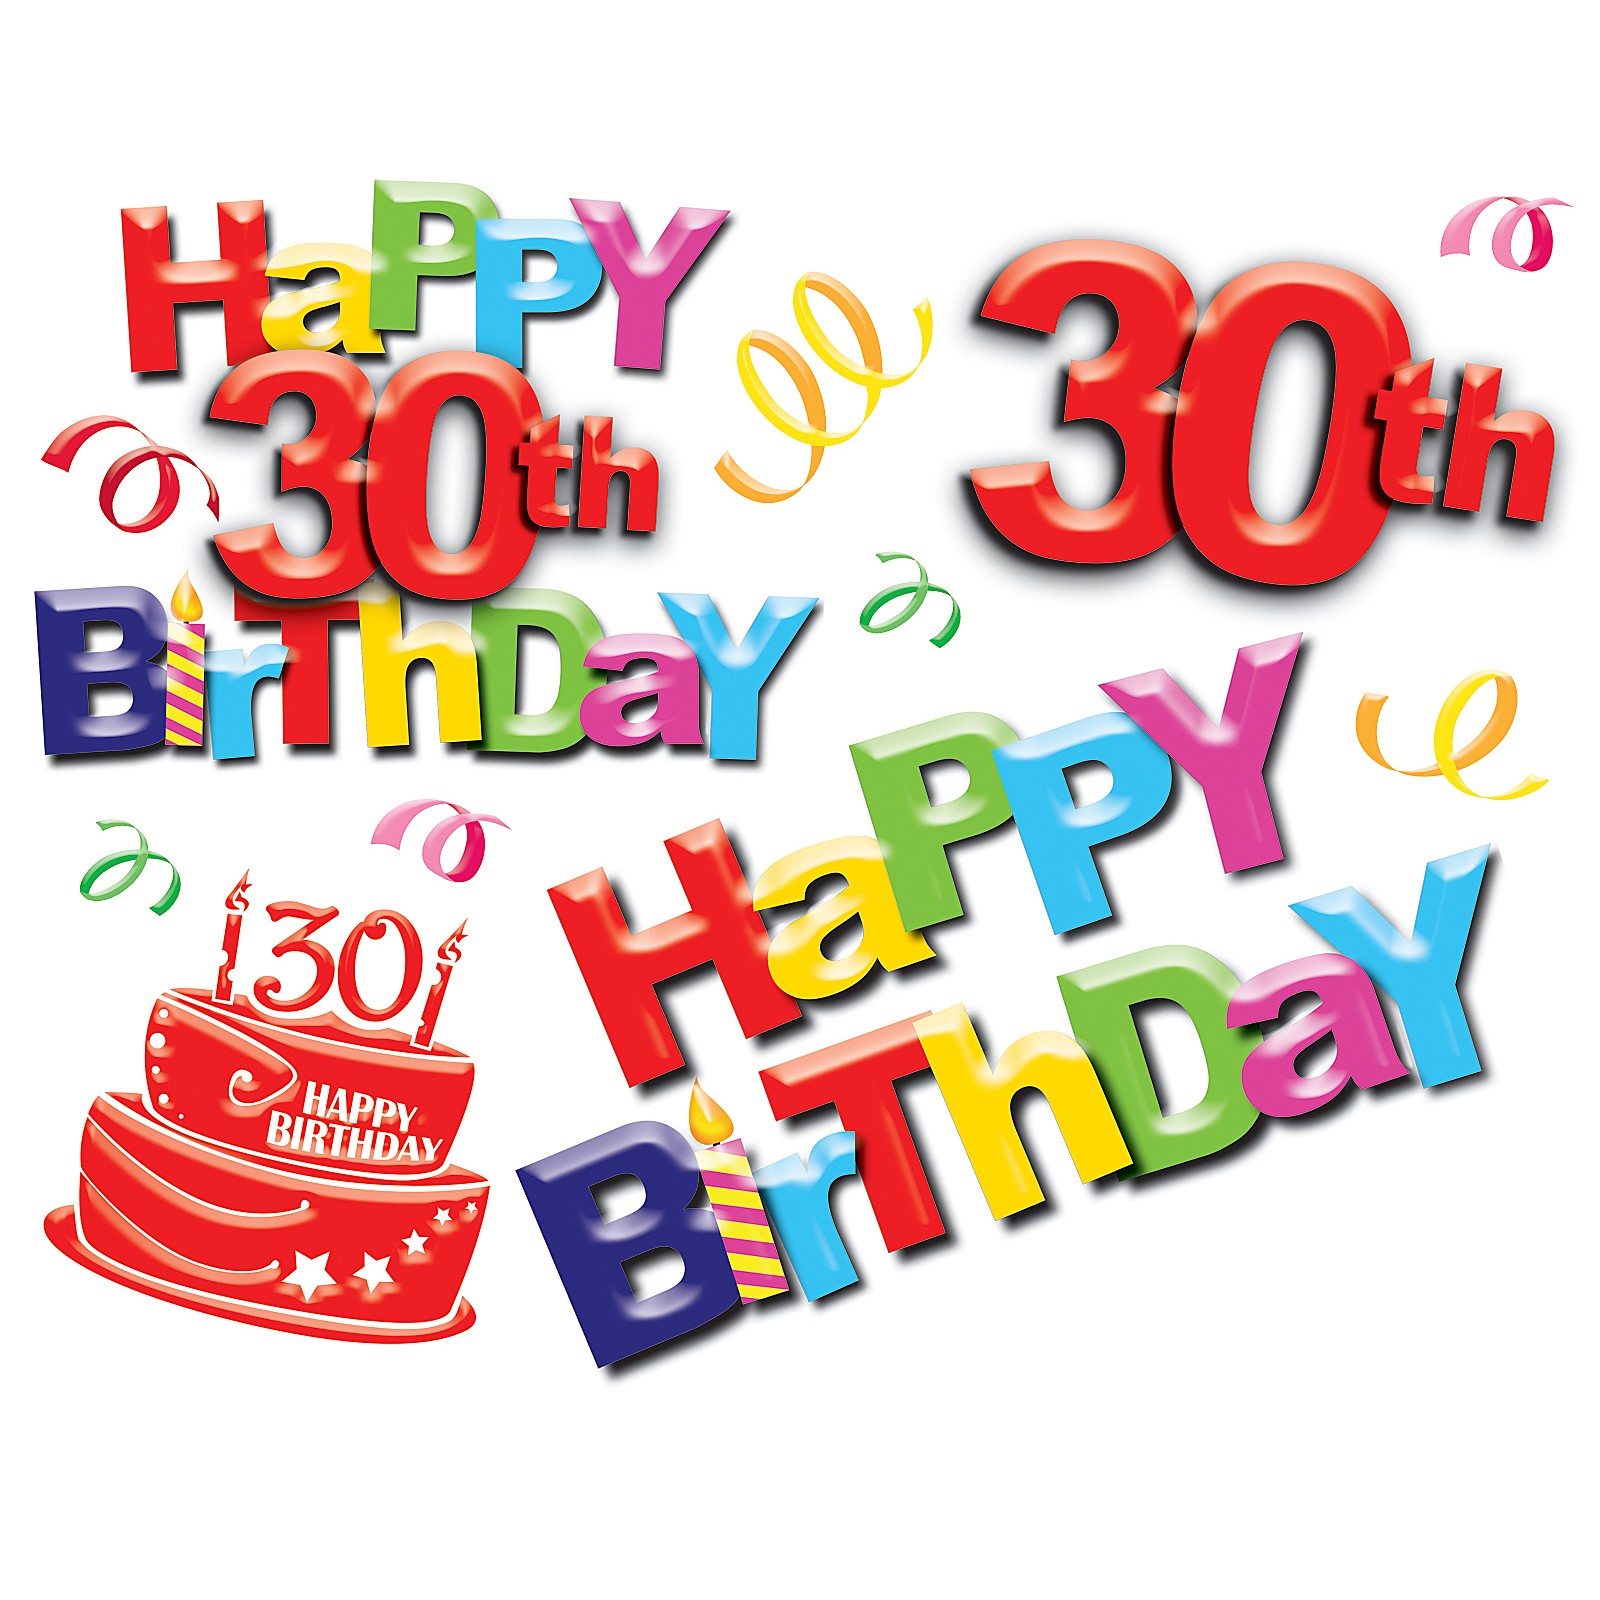 180 Happy 30th Birthday Wishes Quotes Sayings Messages And HD Images